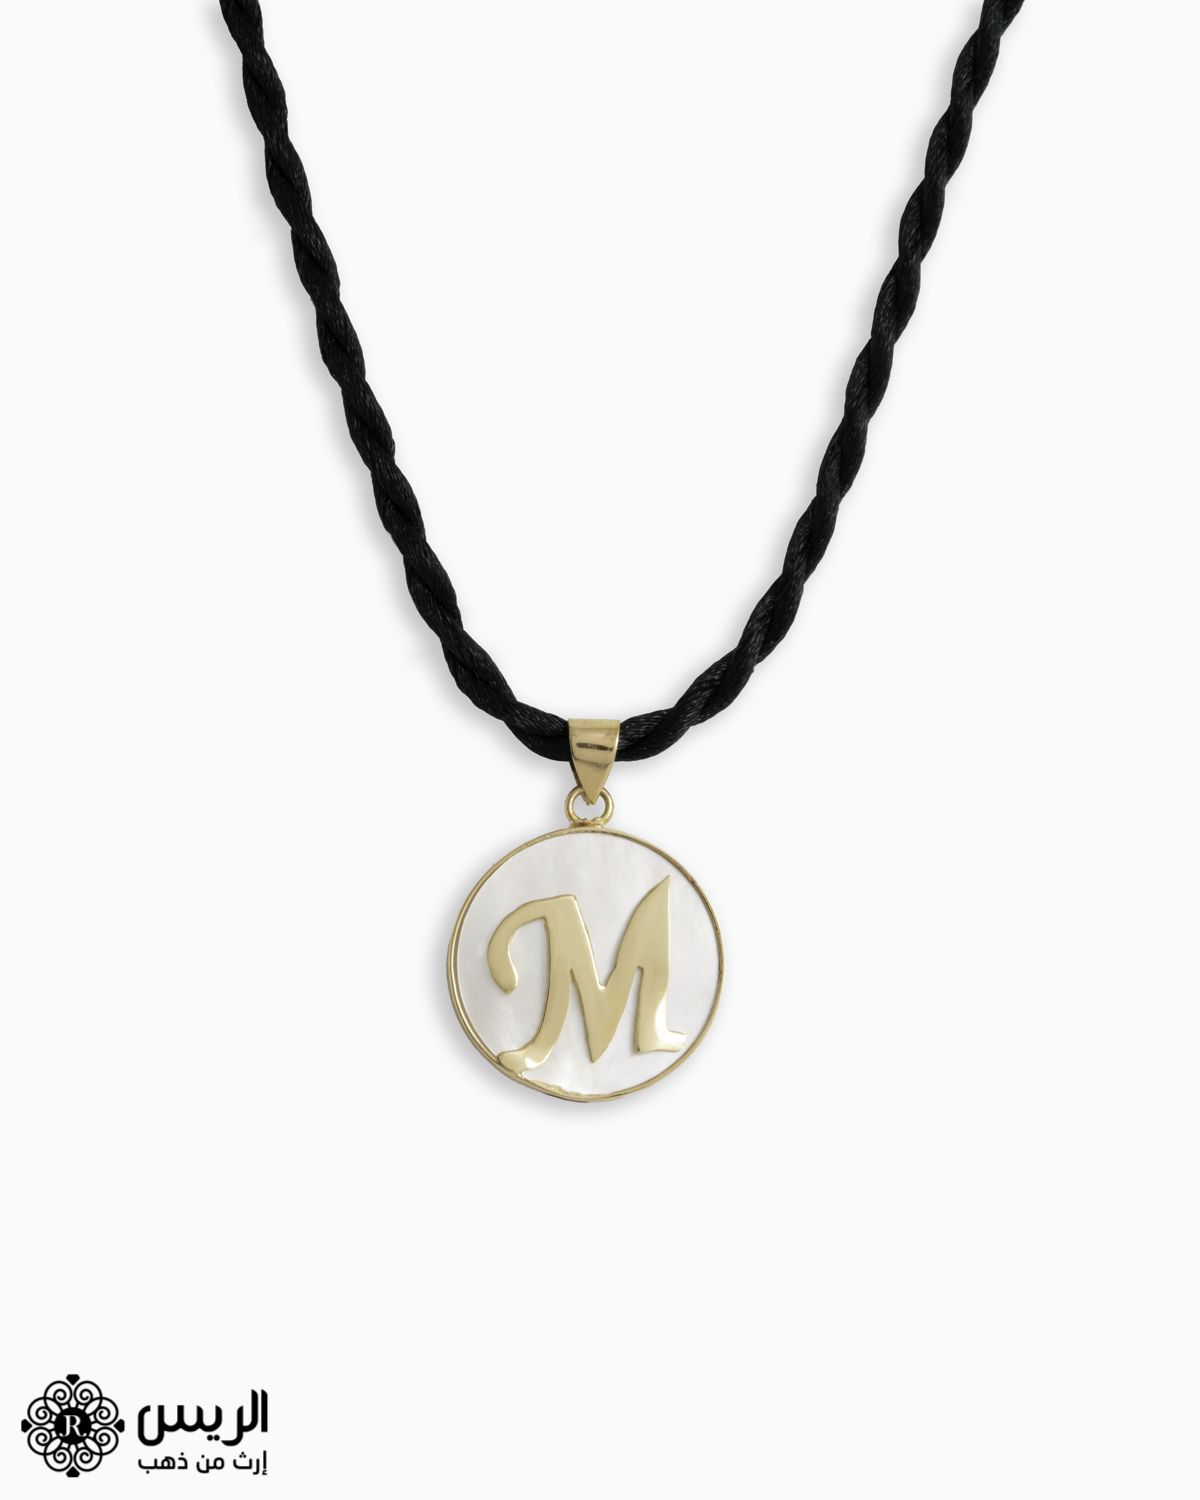 "Shell Necklace Letter "M